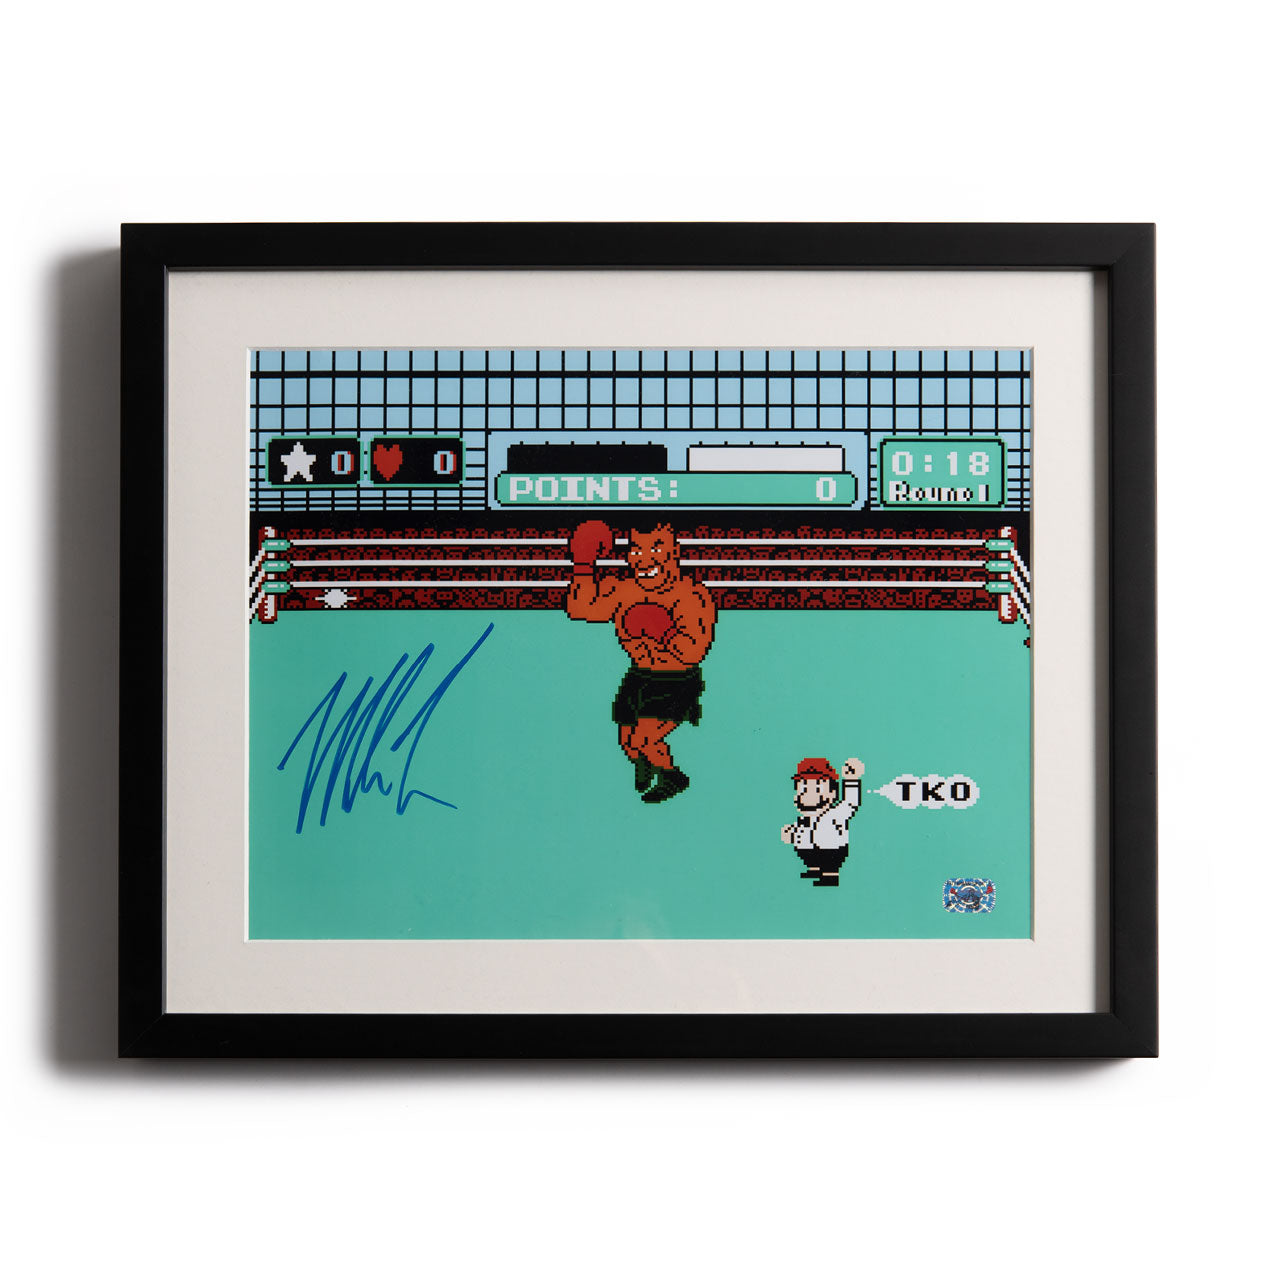 Mike Tyson Autographed Punch-Out Framed Print